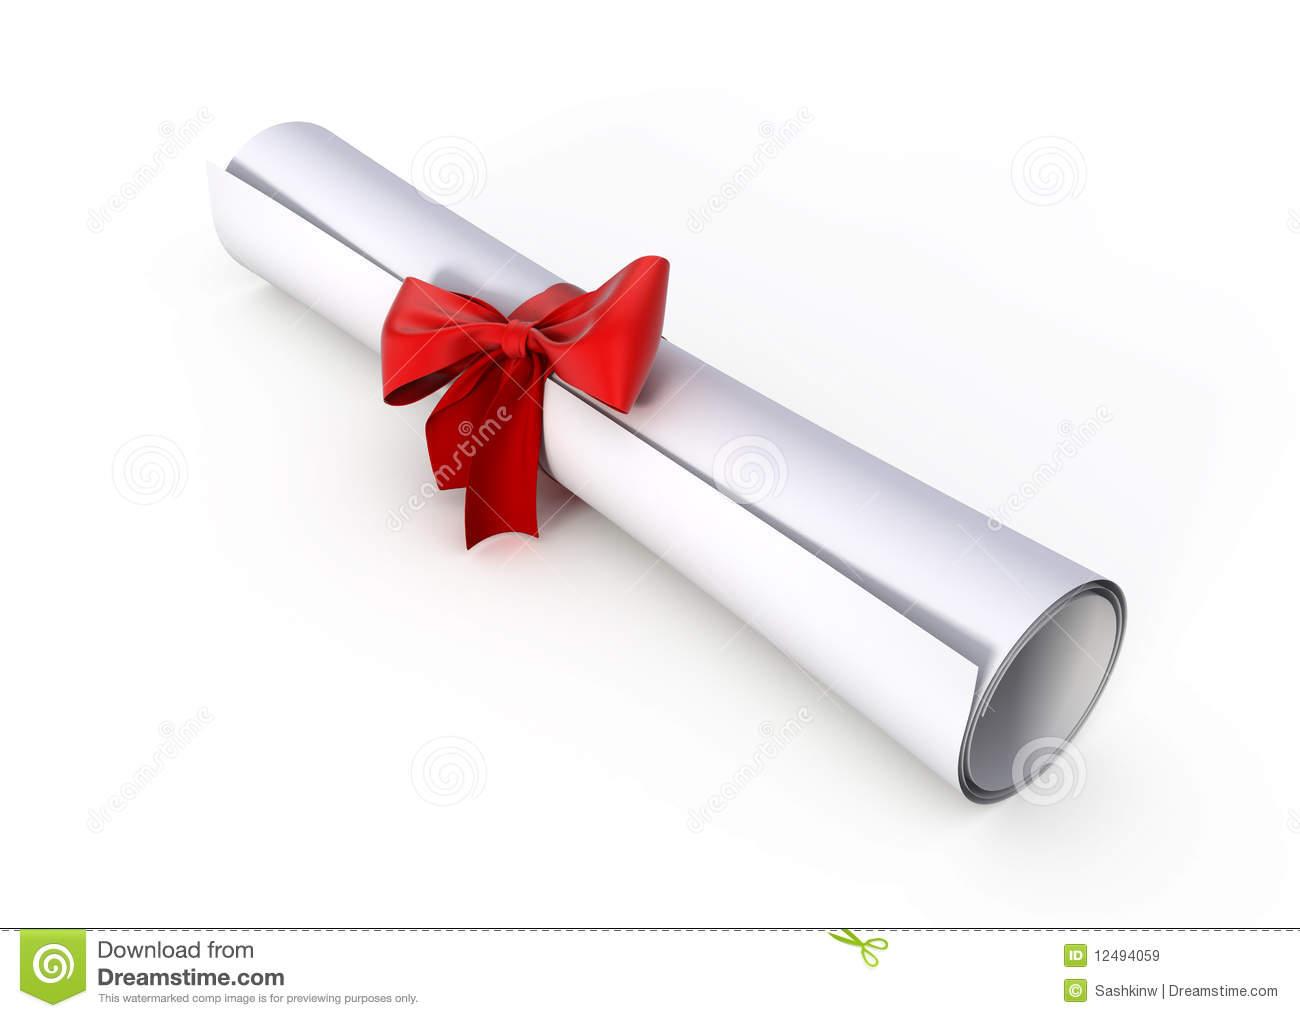 certificate clipart rolled